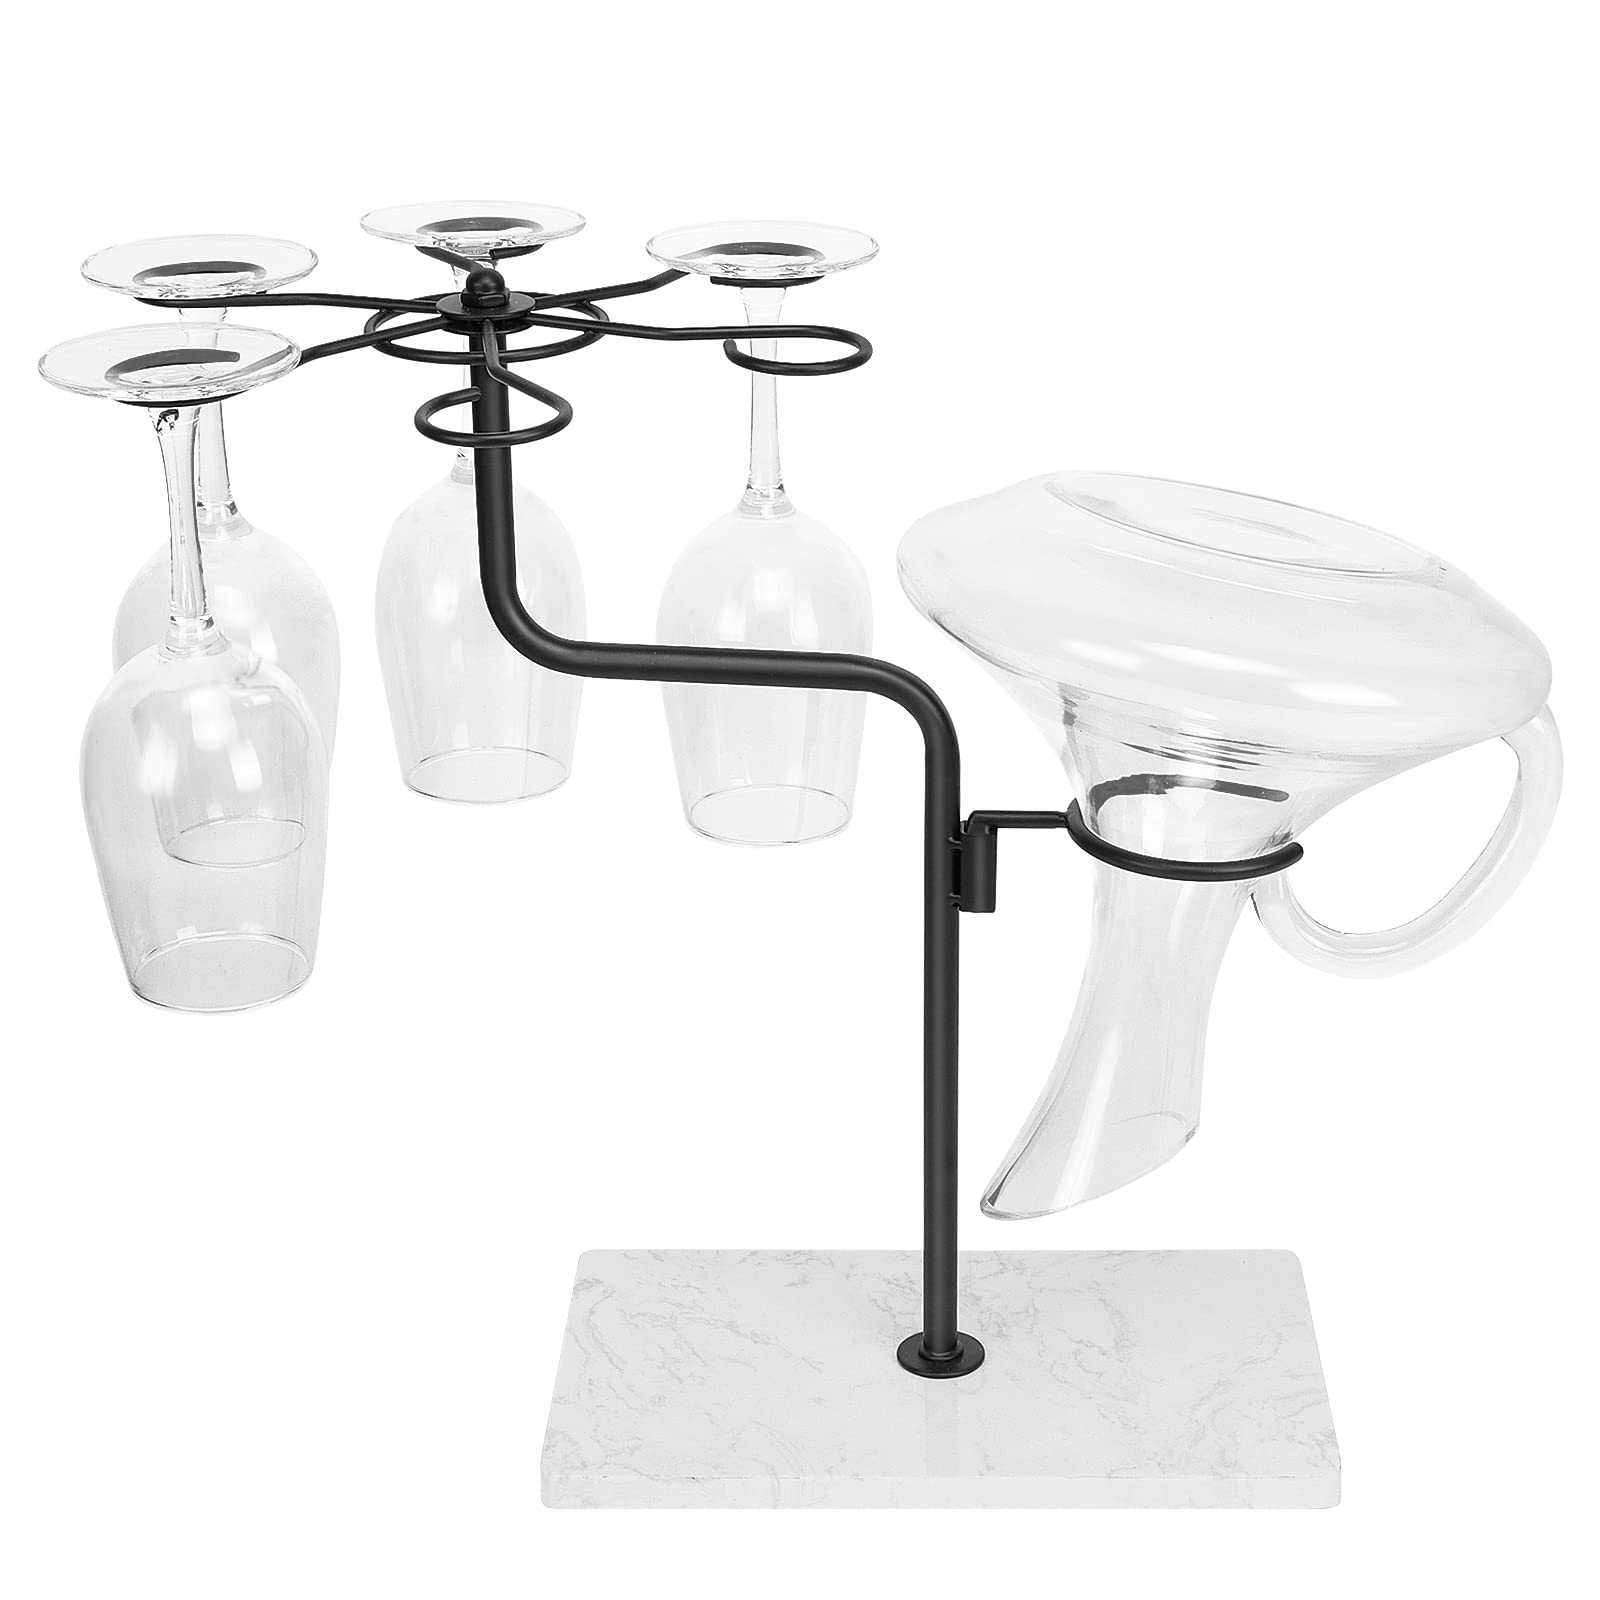 HarJue Wine Glass Holder with Marble Base, Countertop Wine Glass Rack Stand for 6 Wine Cups and 1 Decanter, Tabletop Freestanding Stemware Organizer for Kitchen Home Bar Cabinet, Matte Black